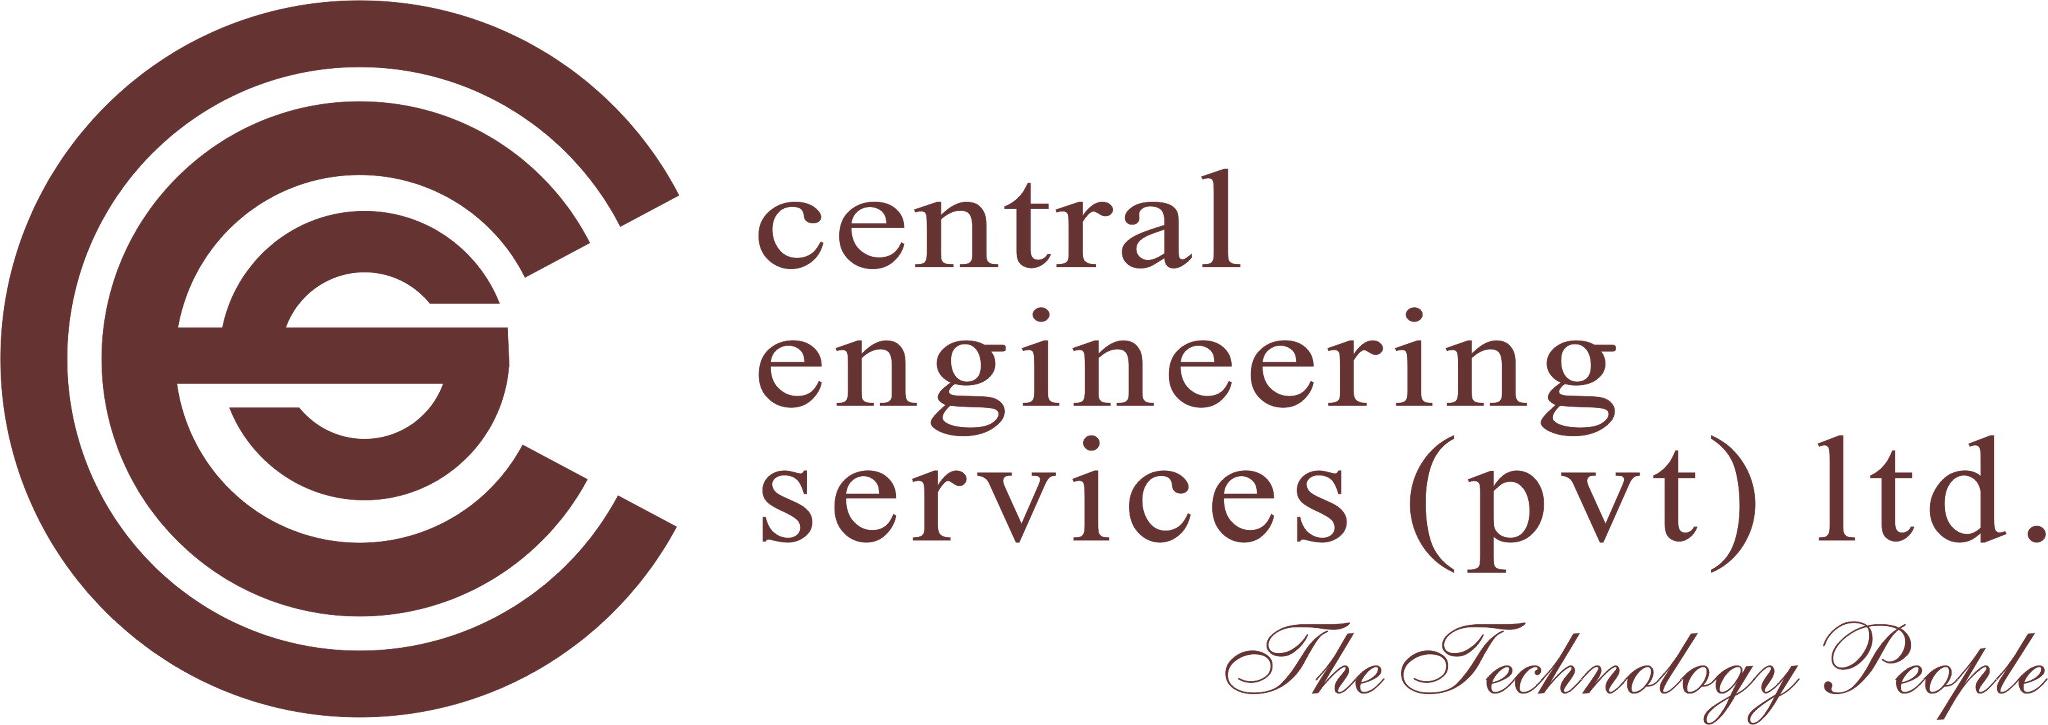 Central Engineering Services pvt Ltd